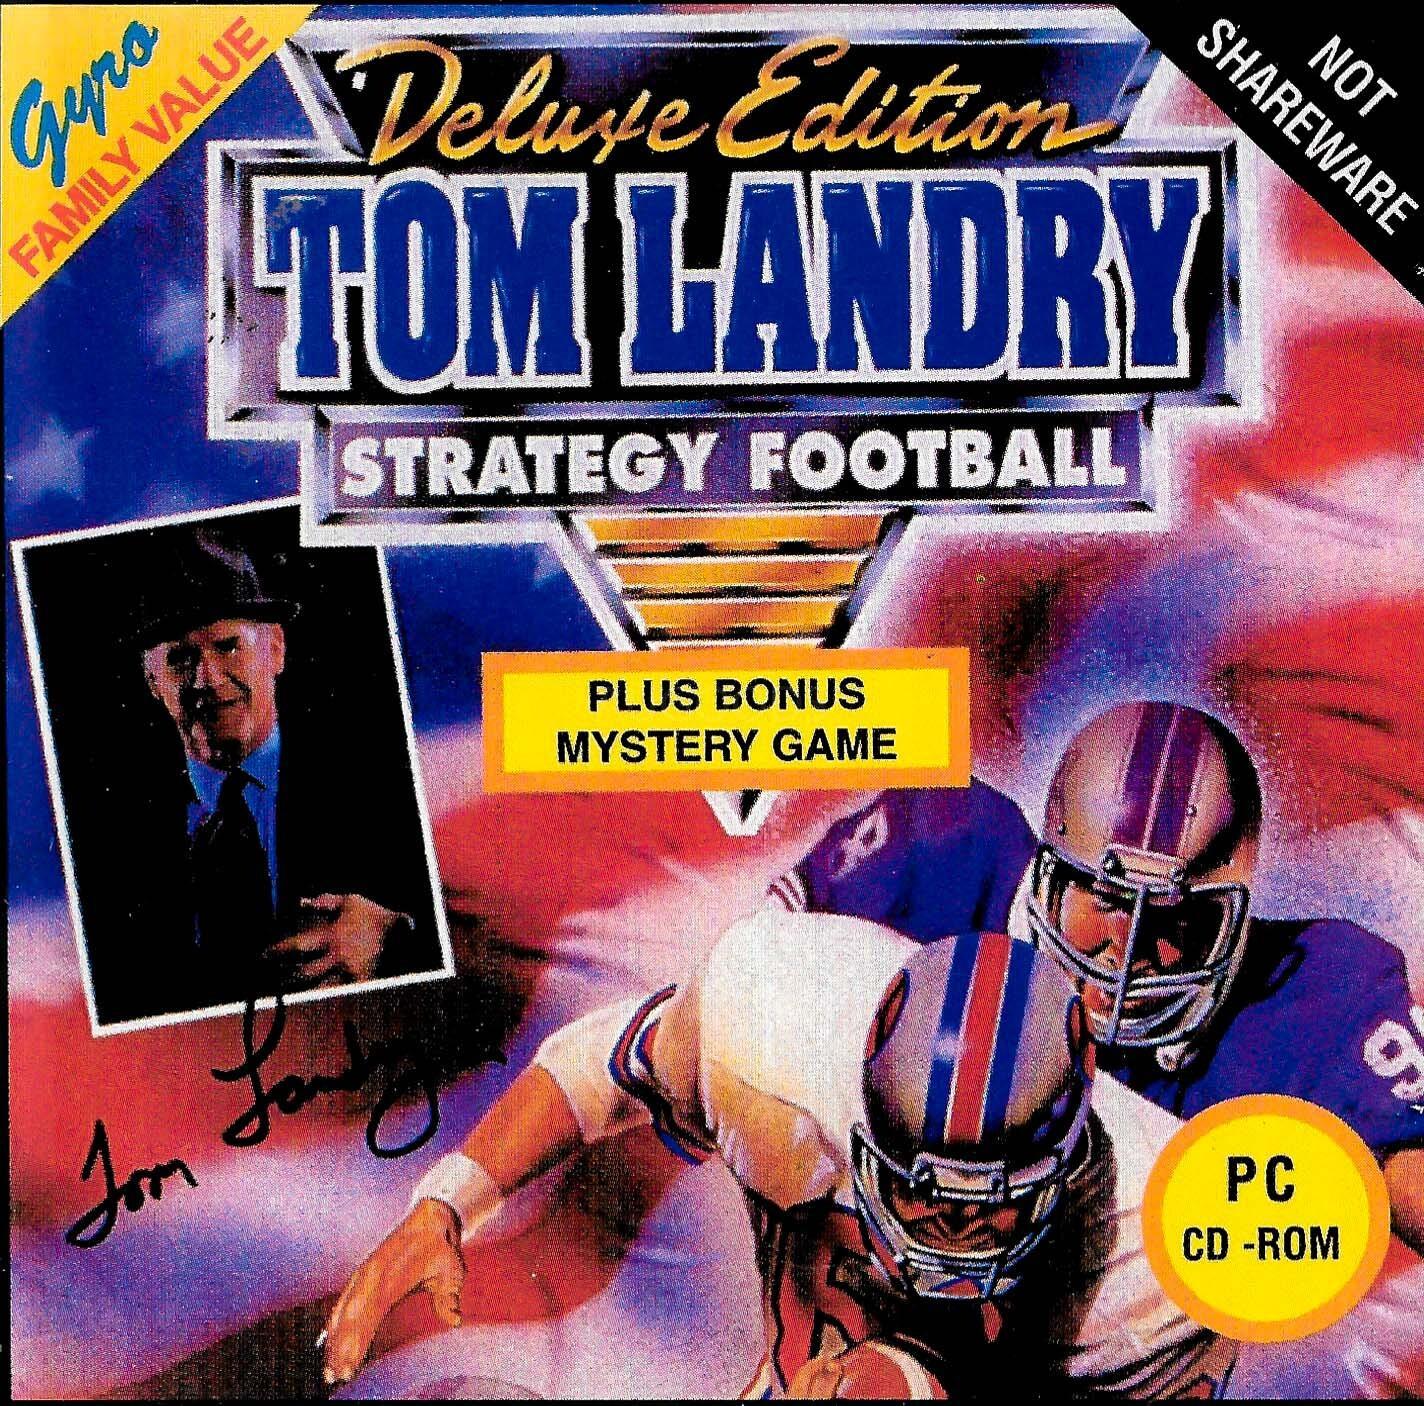 Tom Landry Strategy Football ROM PRE-OWNED CD: DISC EXCELLENT